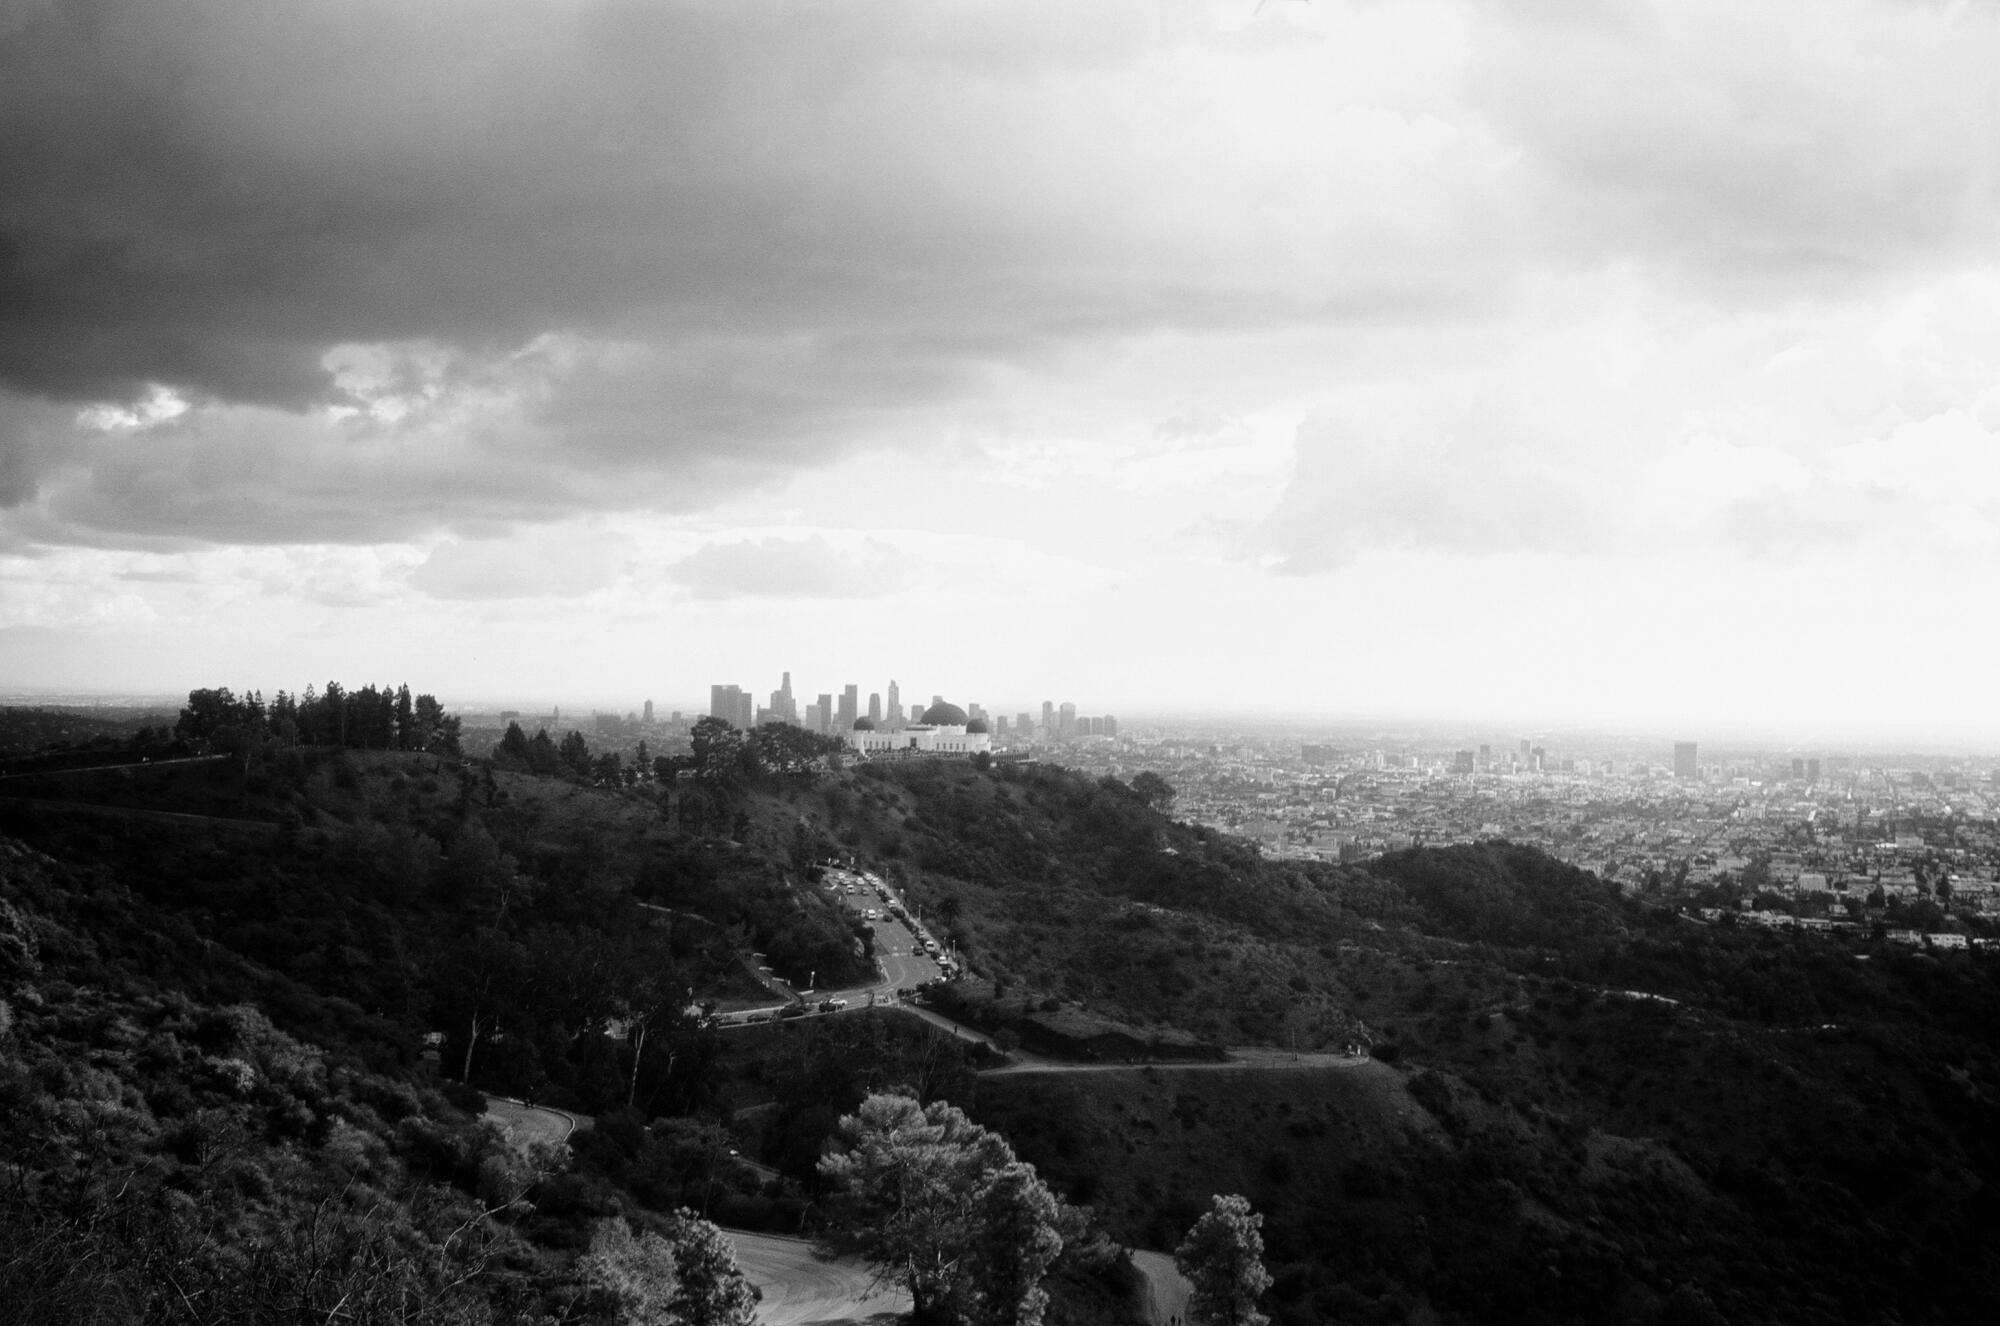 A scene of Griffith Observatory overlooking downtown Los Angeles